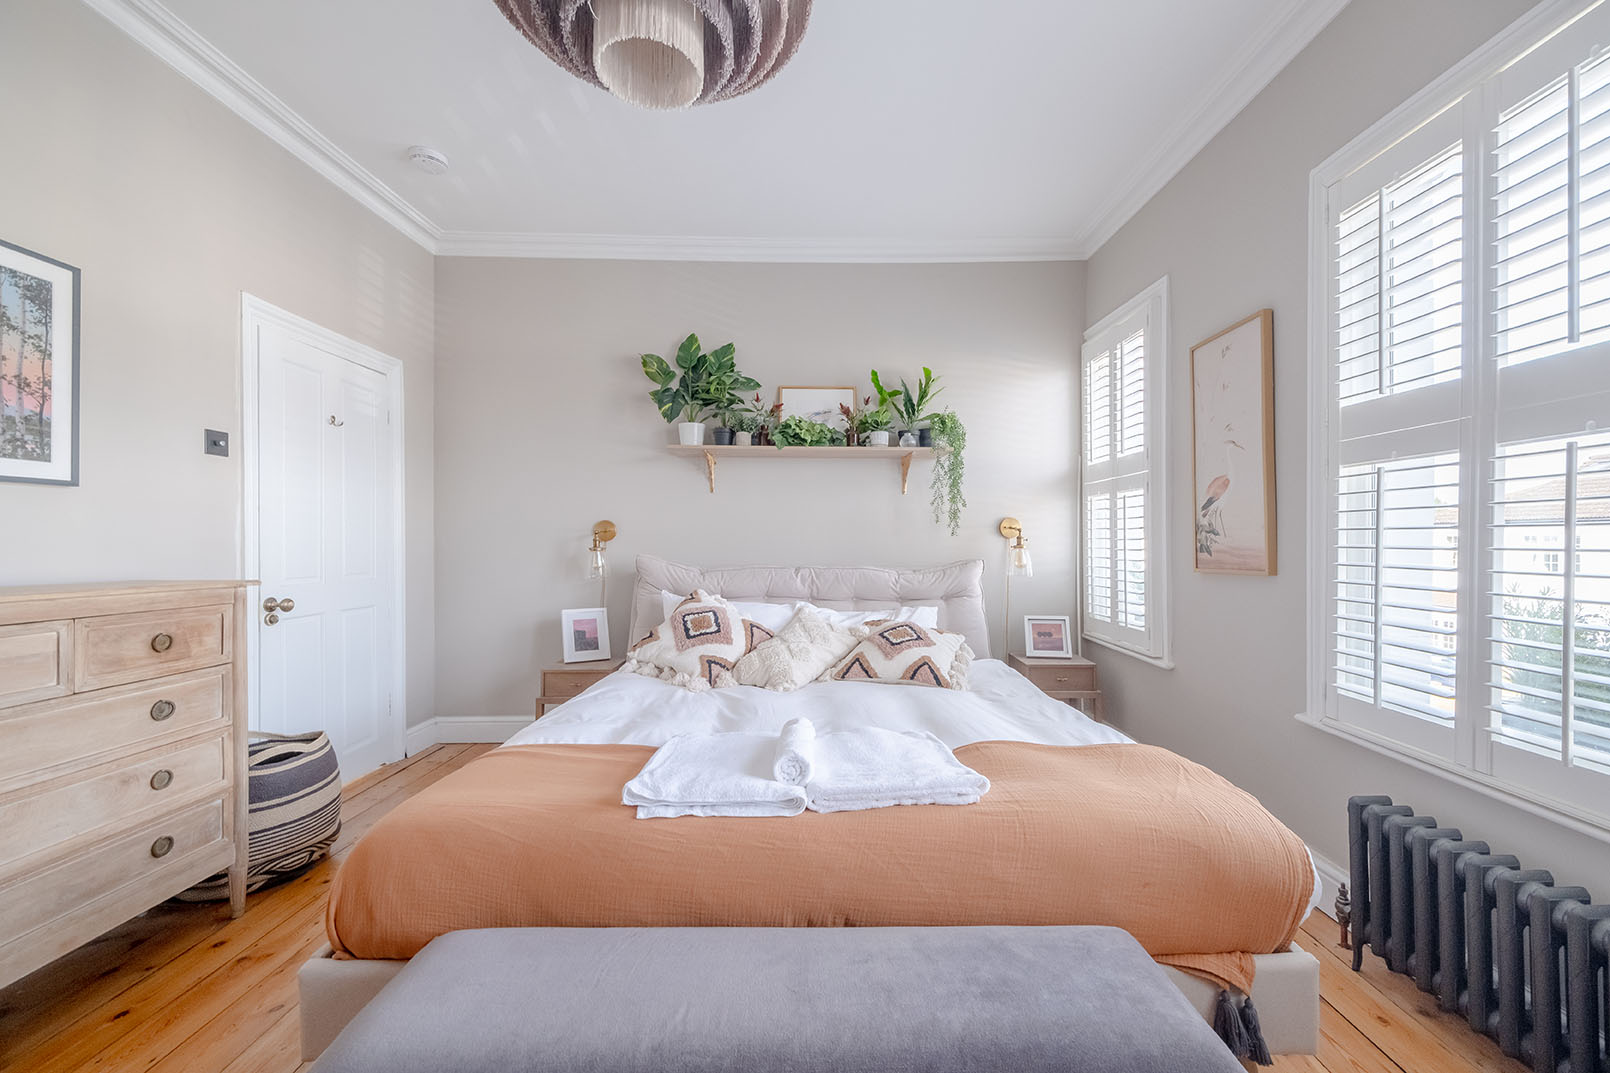 a bedroom, bright and well decorated, photo taken directly from the front of the bed, still capturing the whole room for property photography.